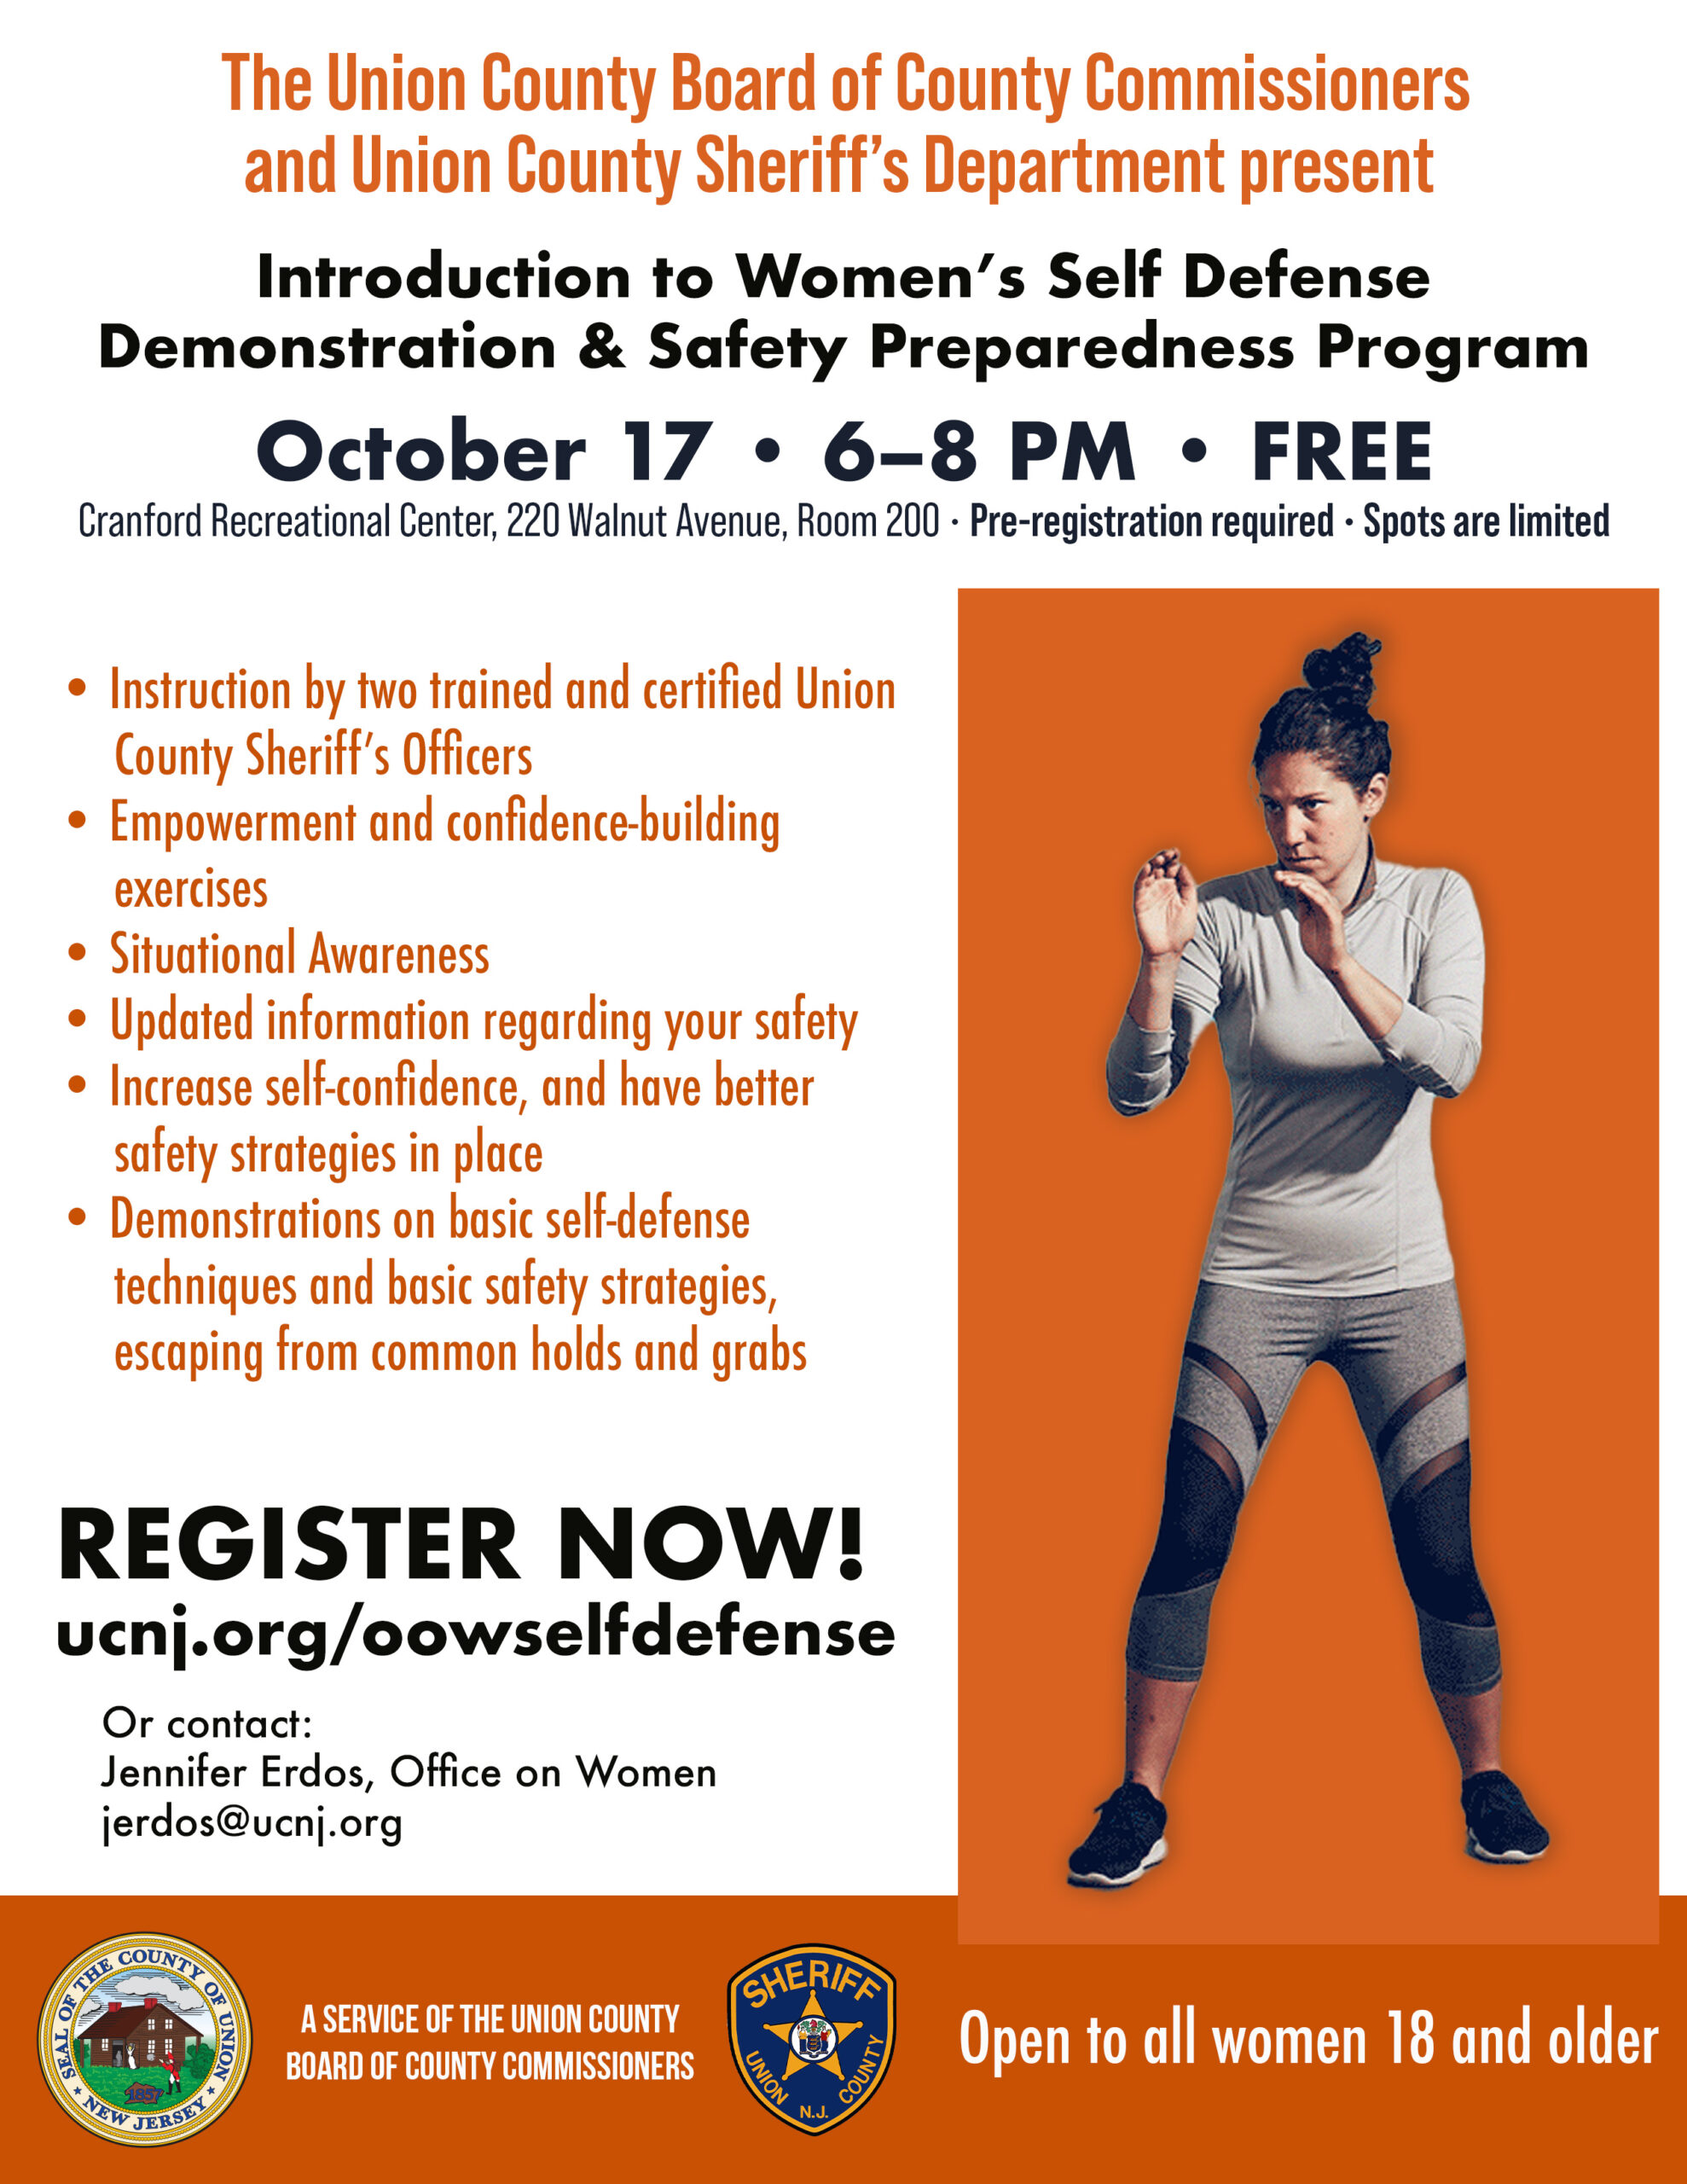 Union County Invites Women to Empower themselves through Self-Defense Class  – County of Union